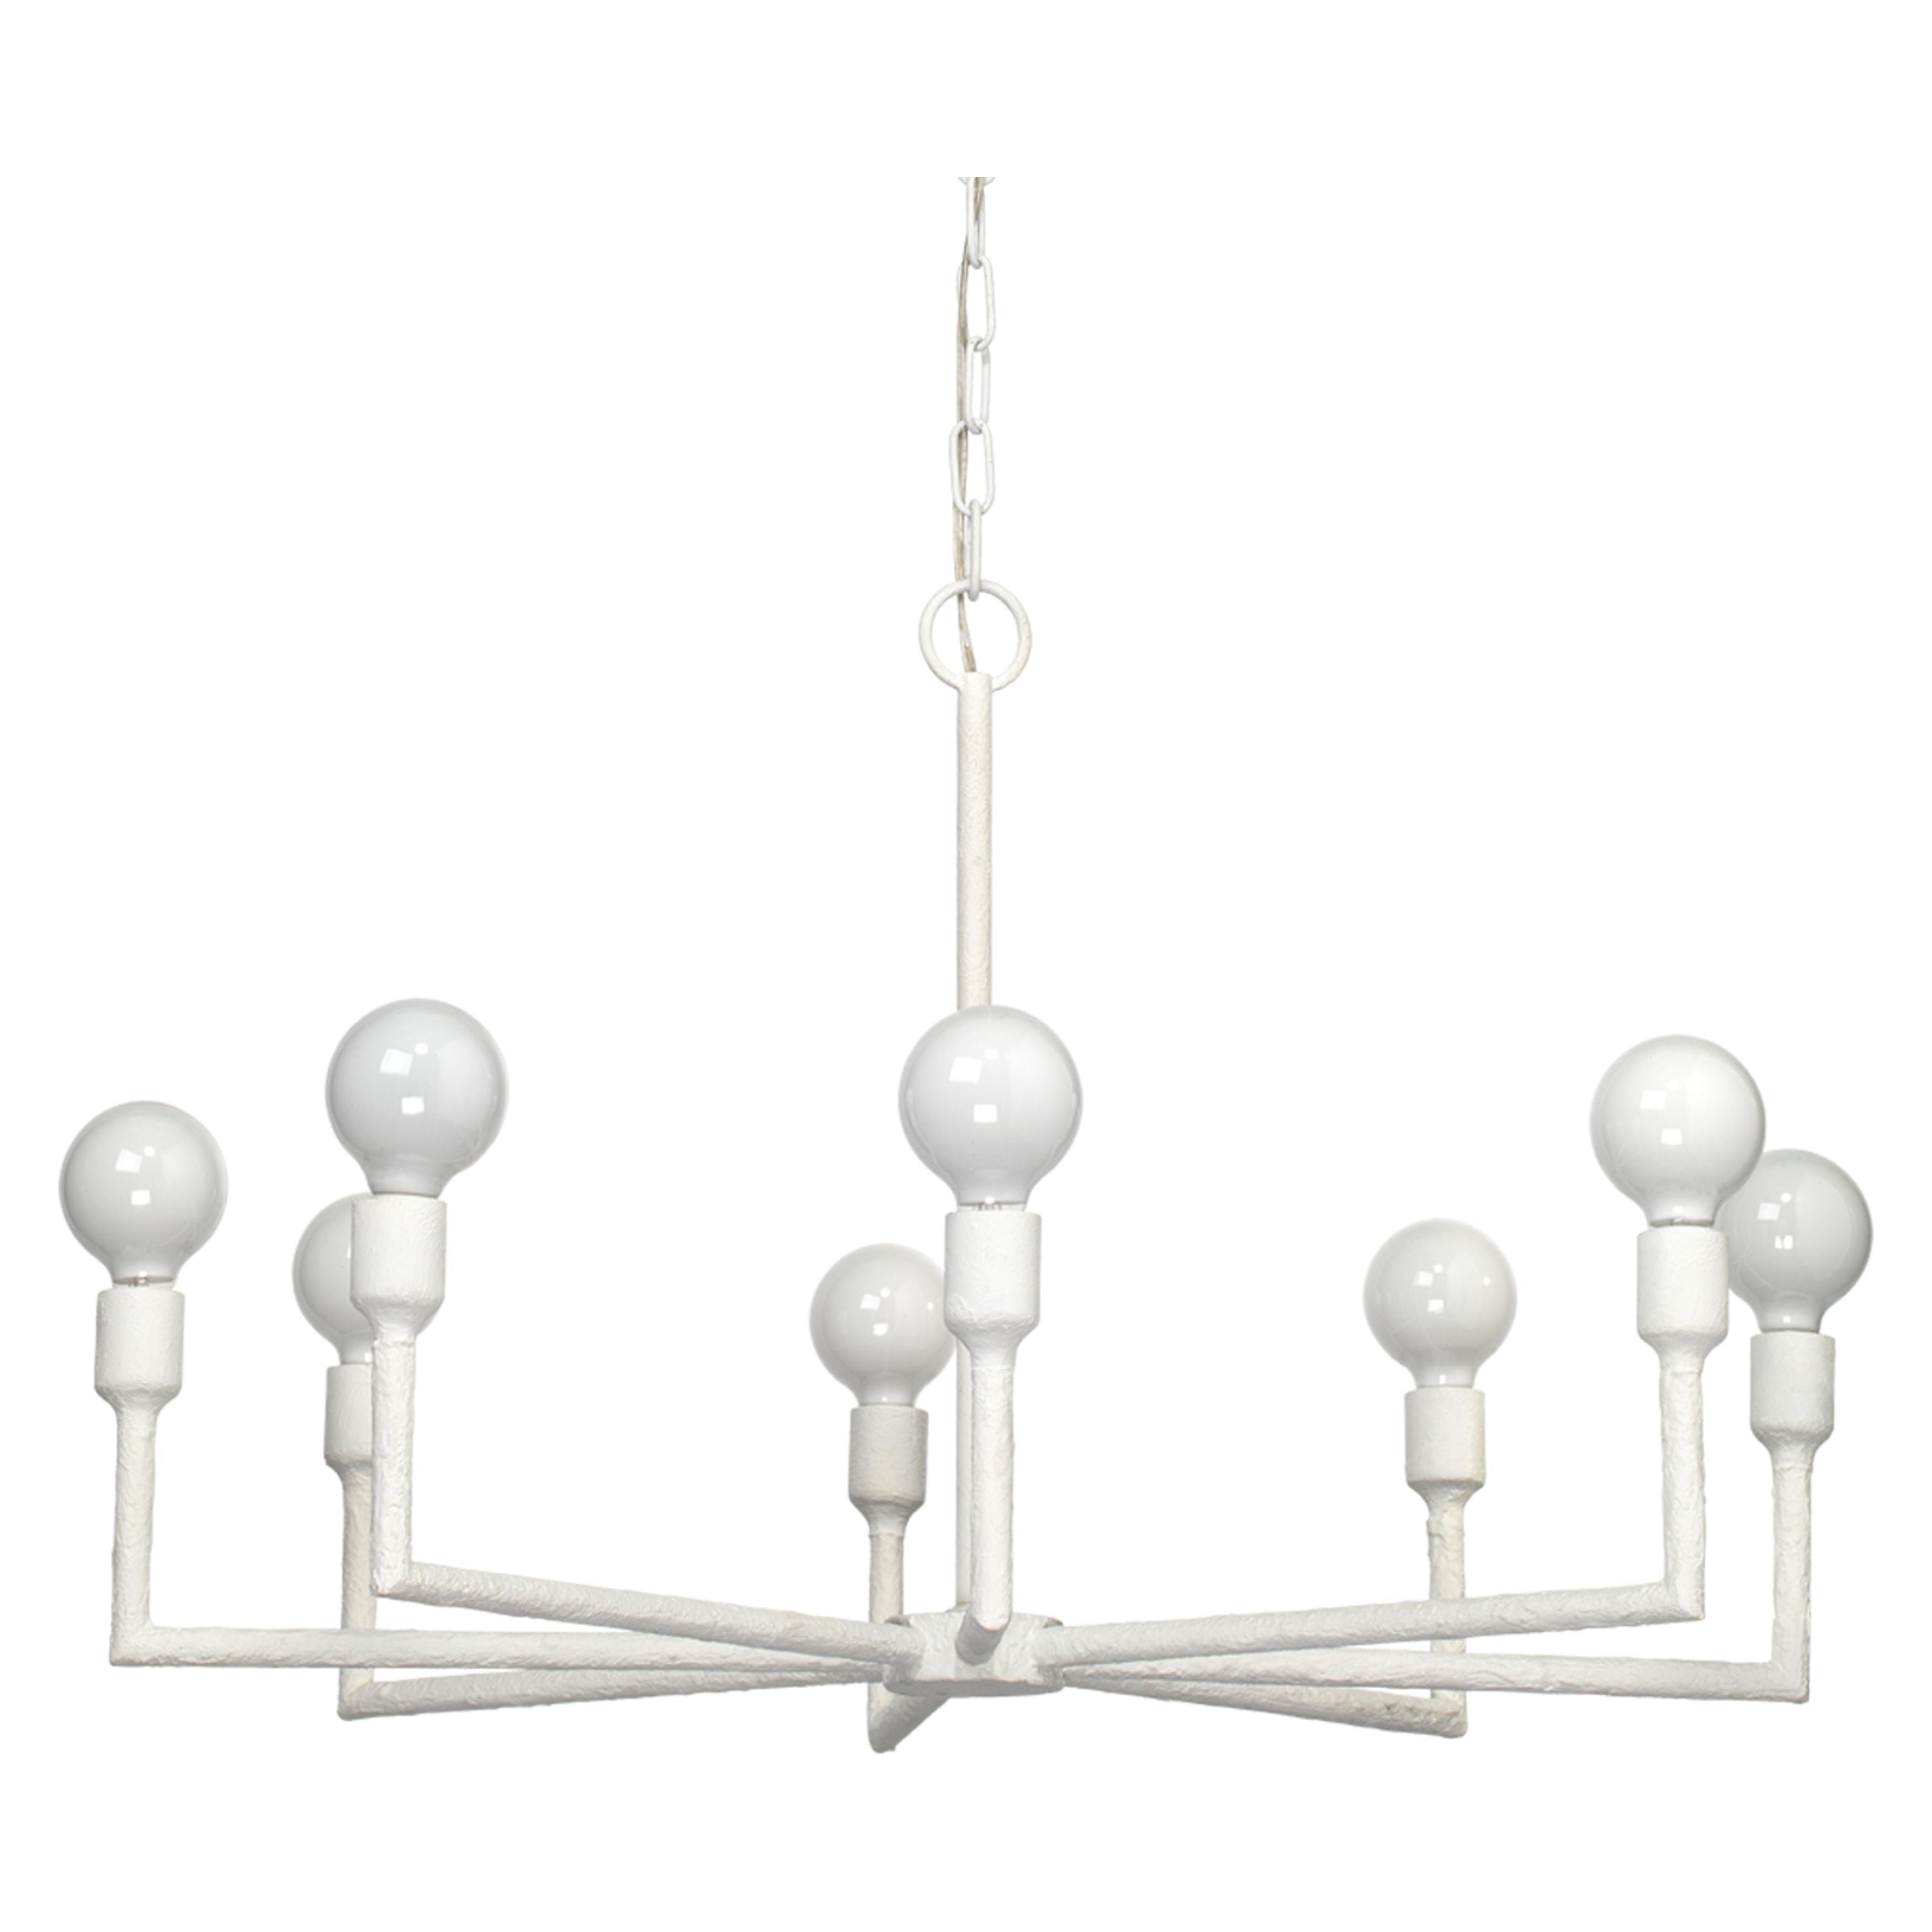 Jamie Young Company - 5PARK-CHWH - Park Chandelier - Park - White